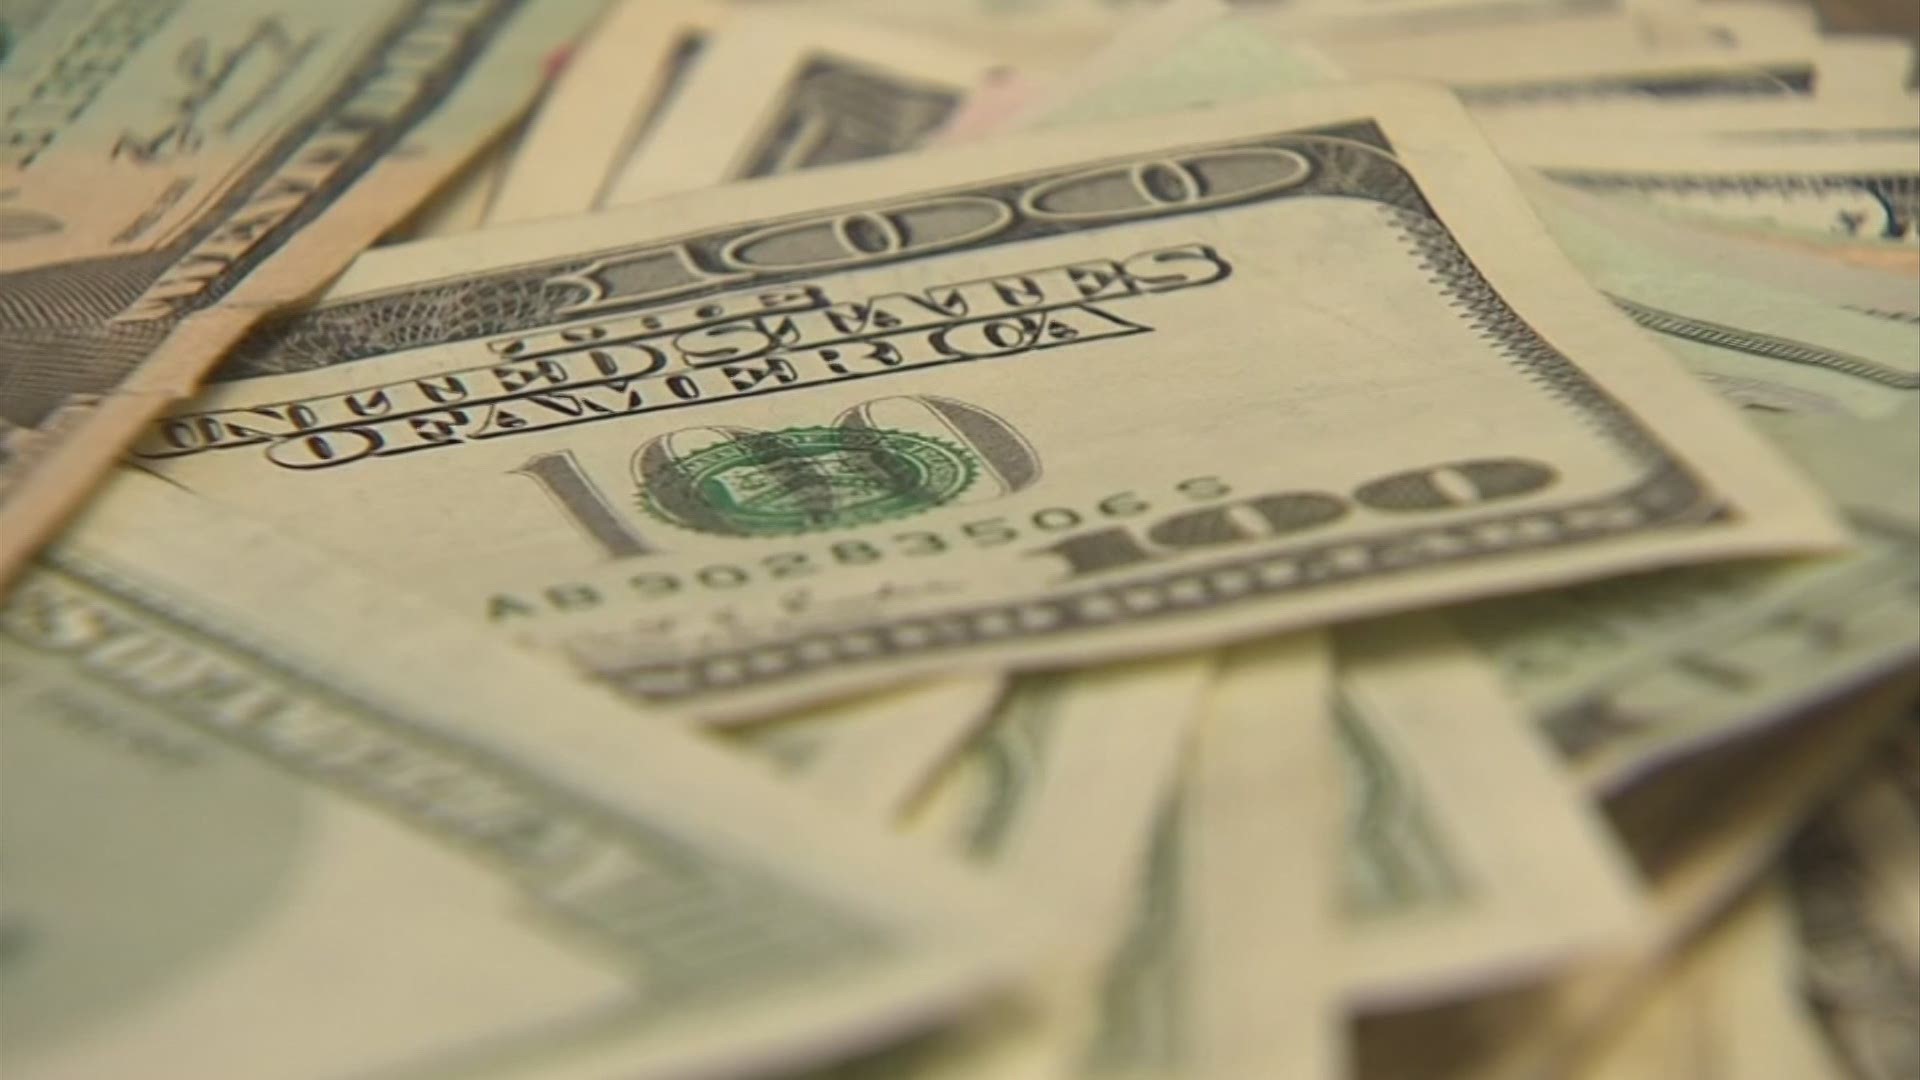 10TV has some tips on resetting your finances after pandemic struggles.